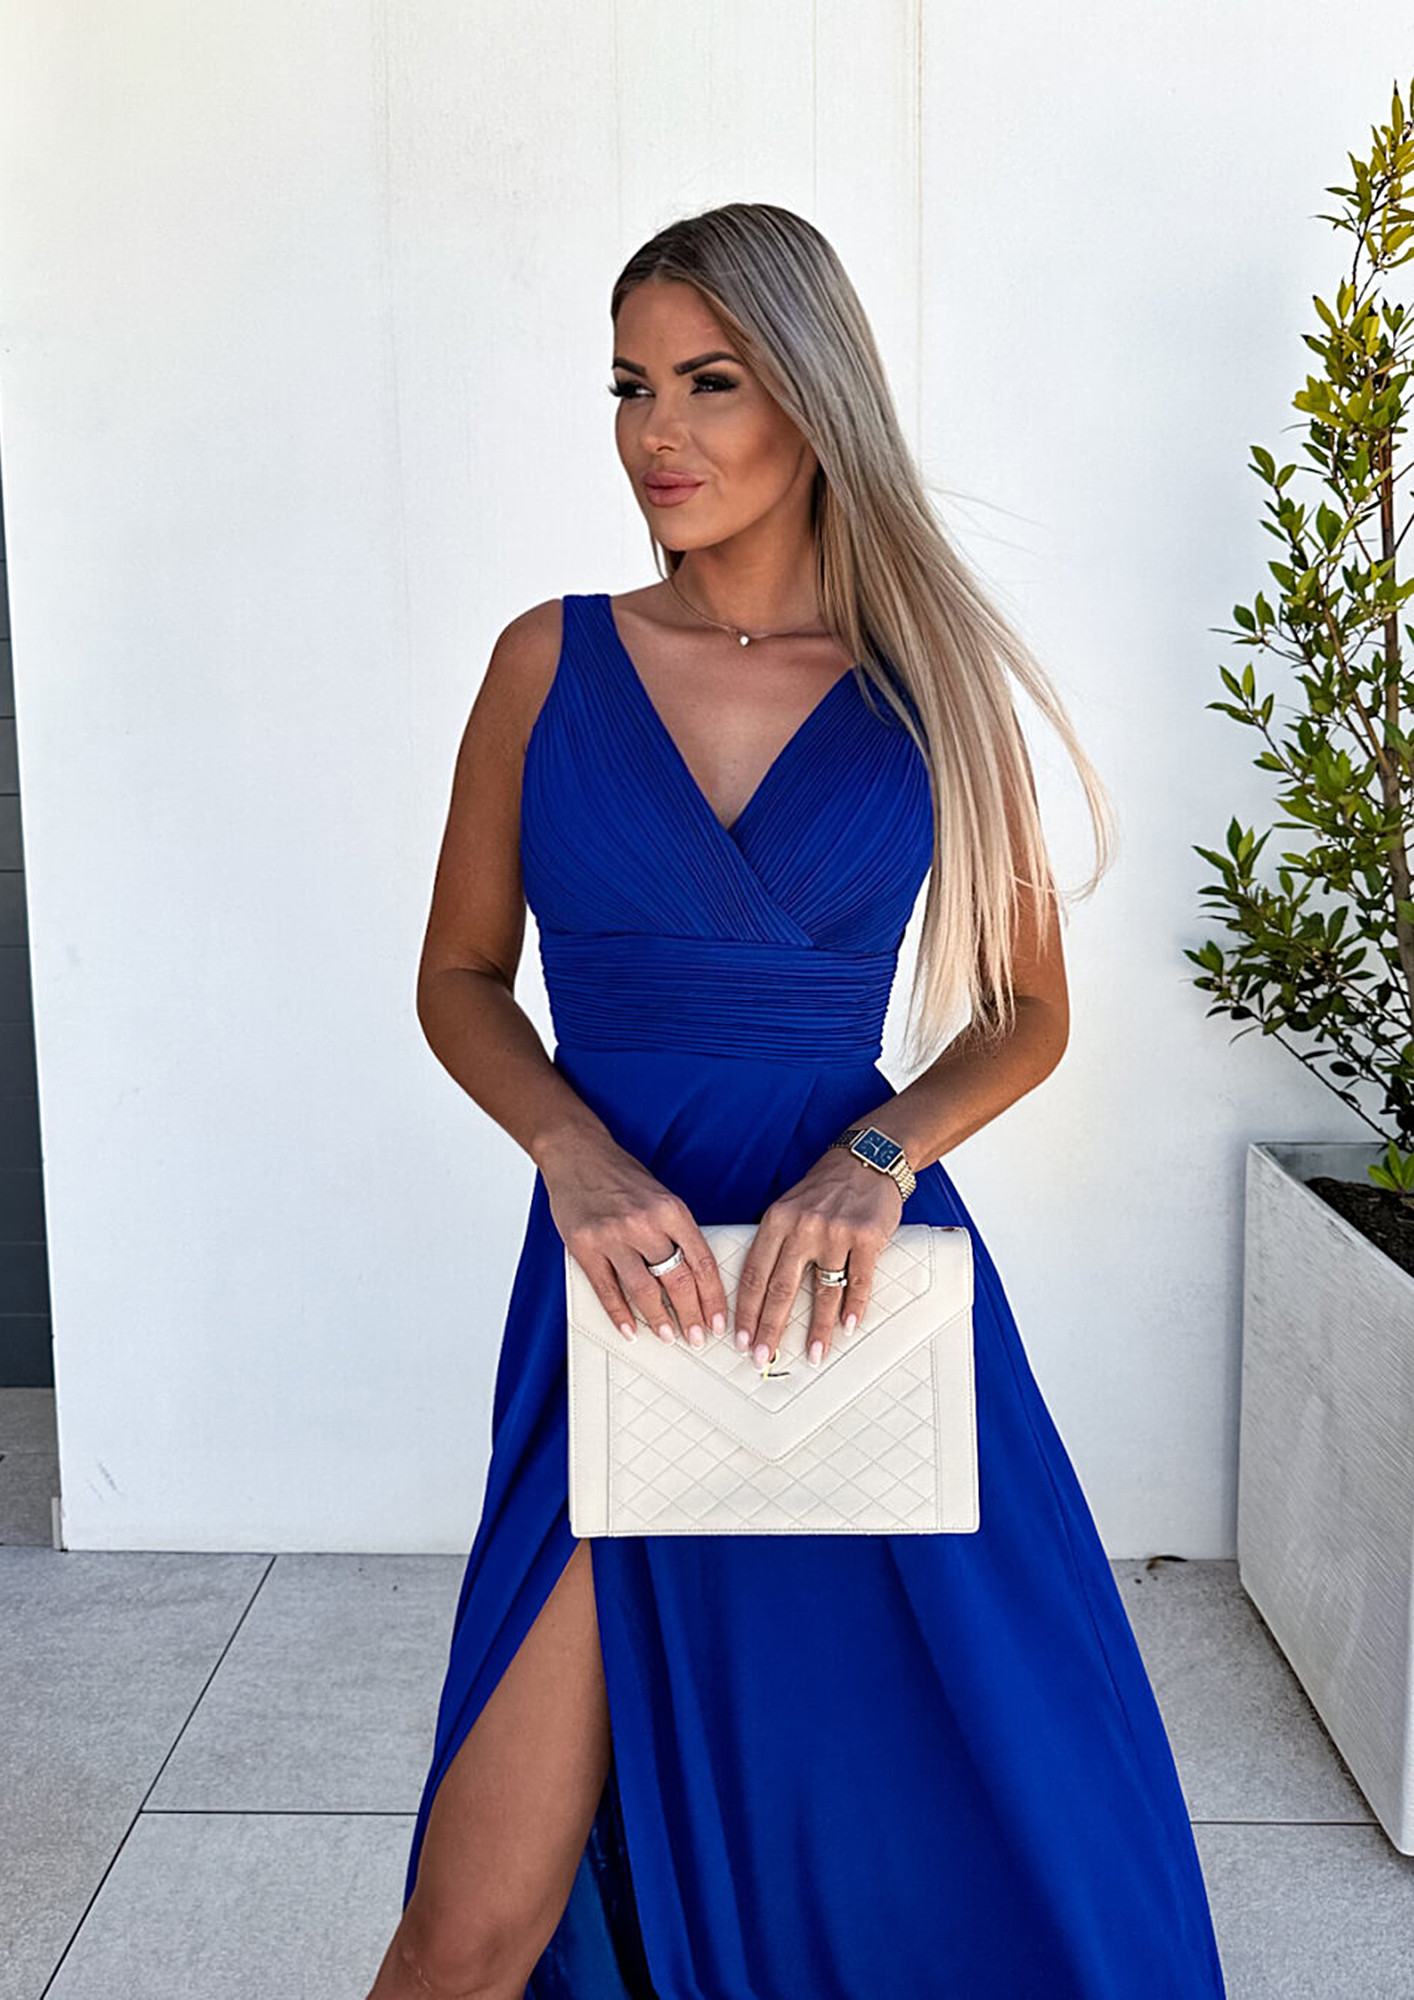 Buy PLEATED BLUE HIGH SLIT MAXI DRESS for Women Online in India